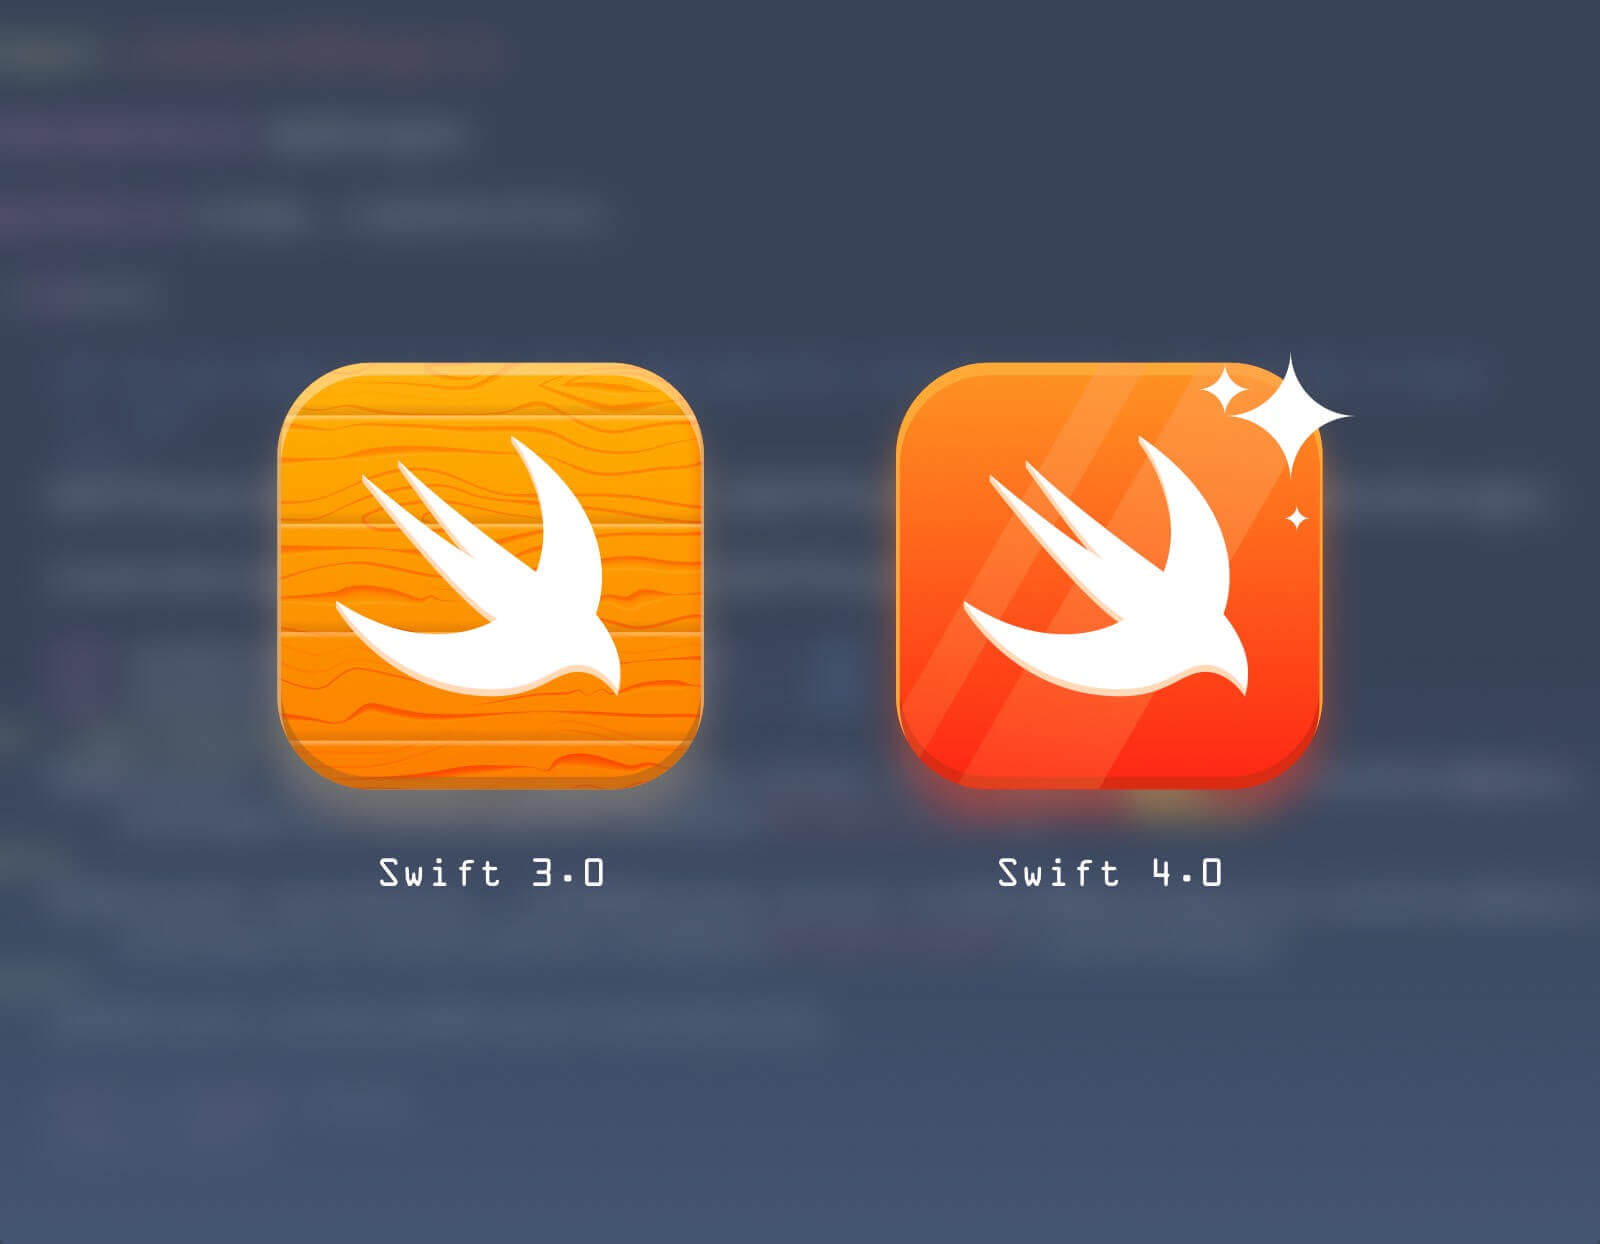 Why do developers shift to SWIFT 4